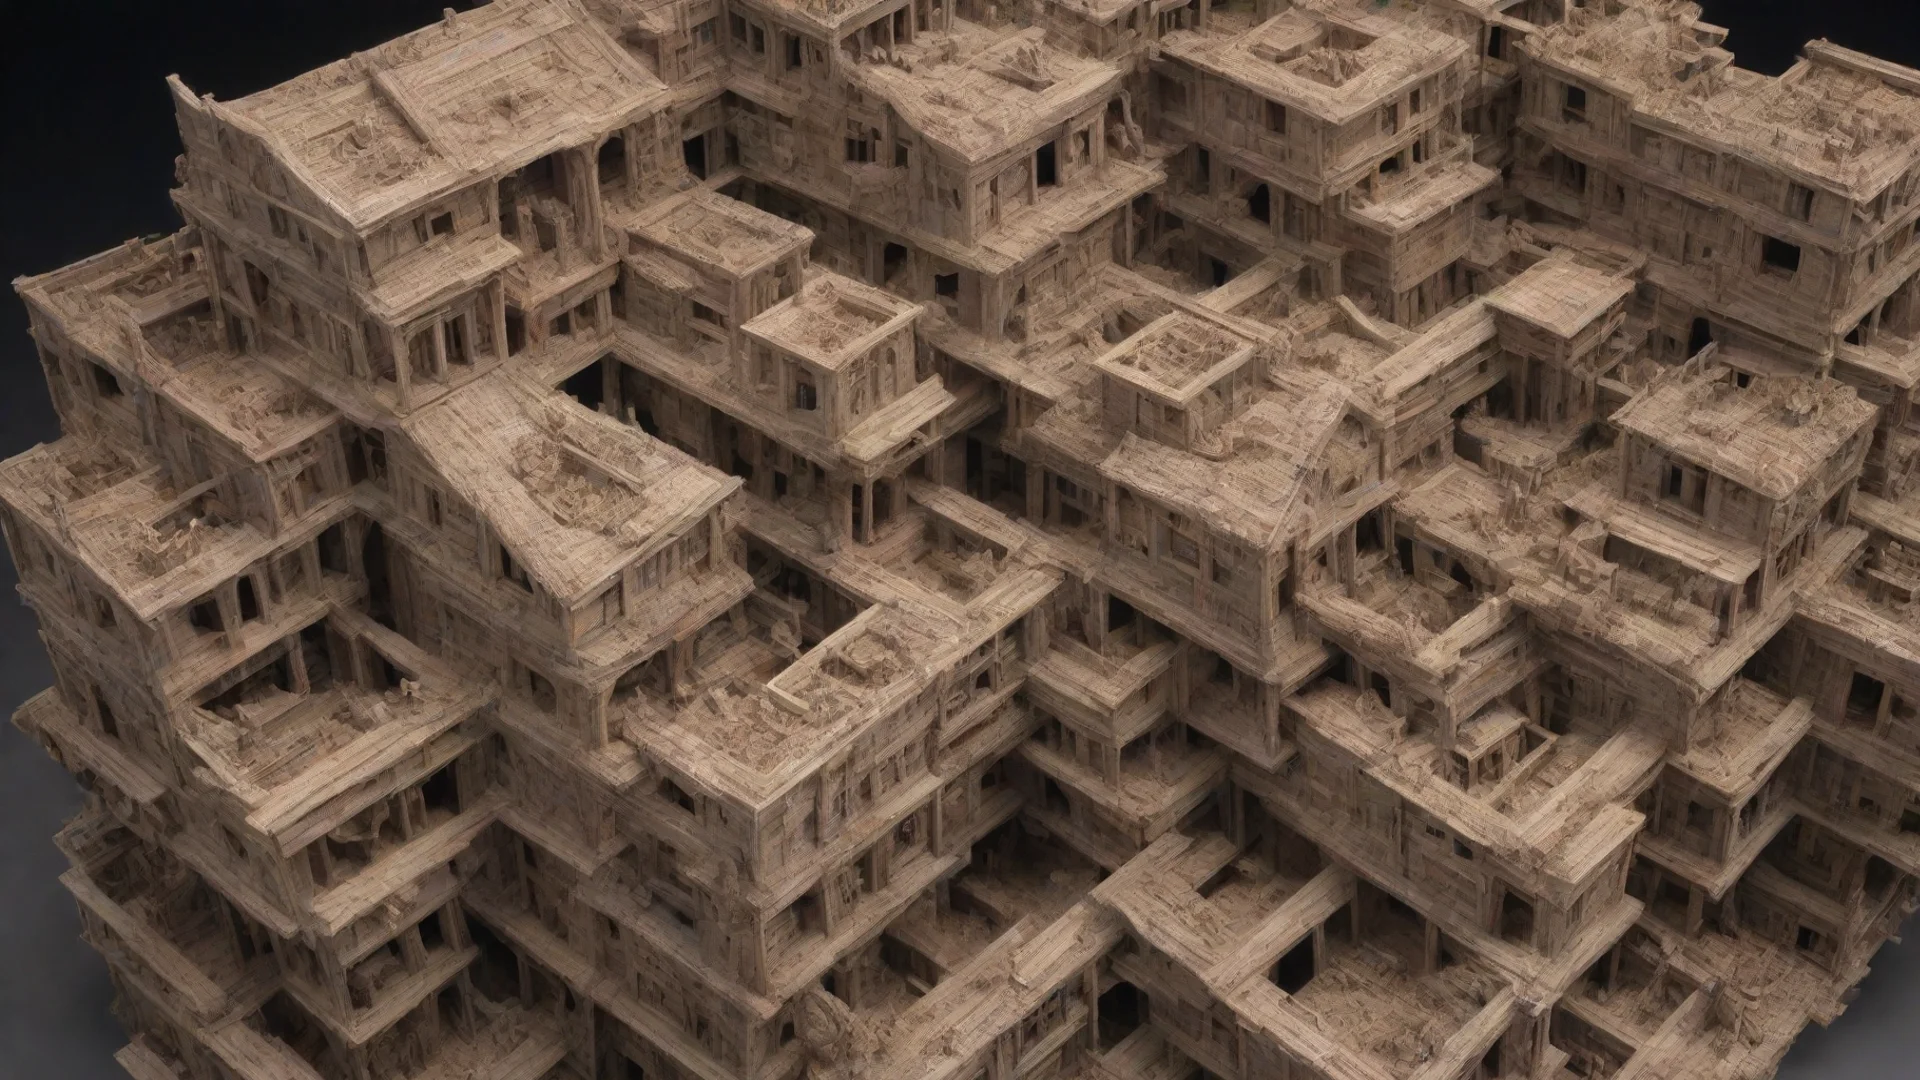 aiartstation art a swarm of parts intertwined upside down escher paradox kitbash greeble timber construction building in a building socia confident engaging wow 3 wide